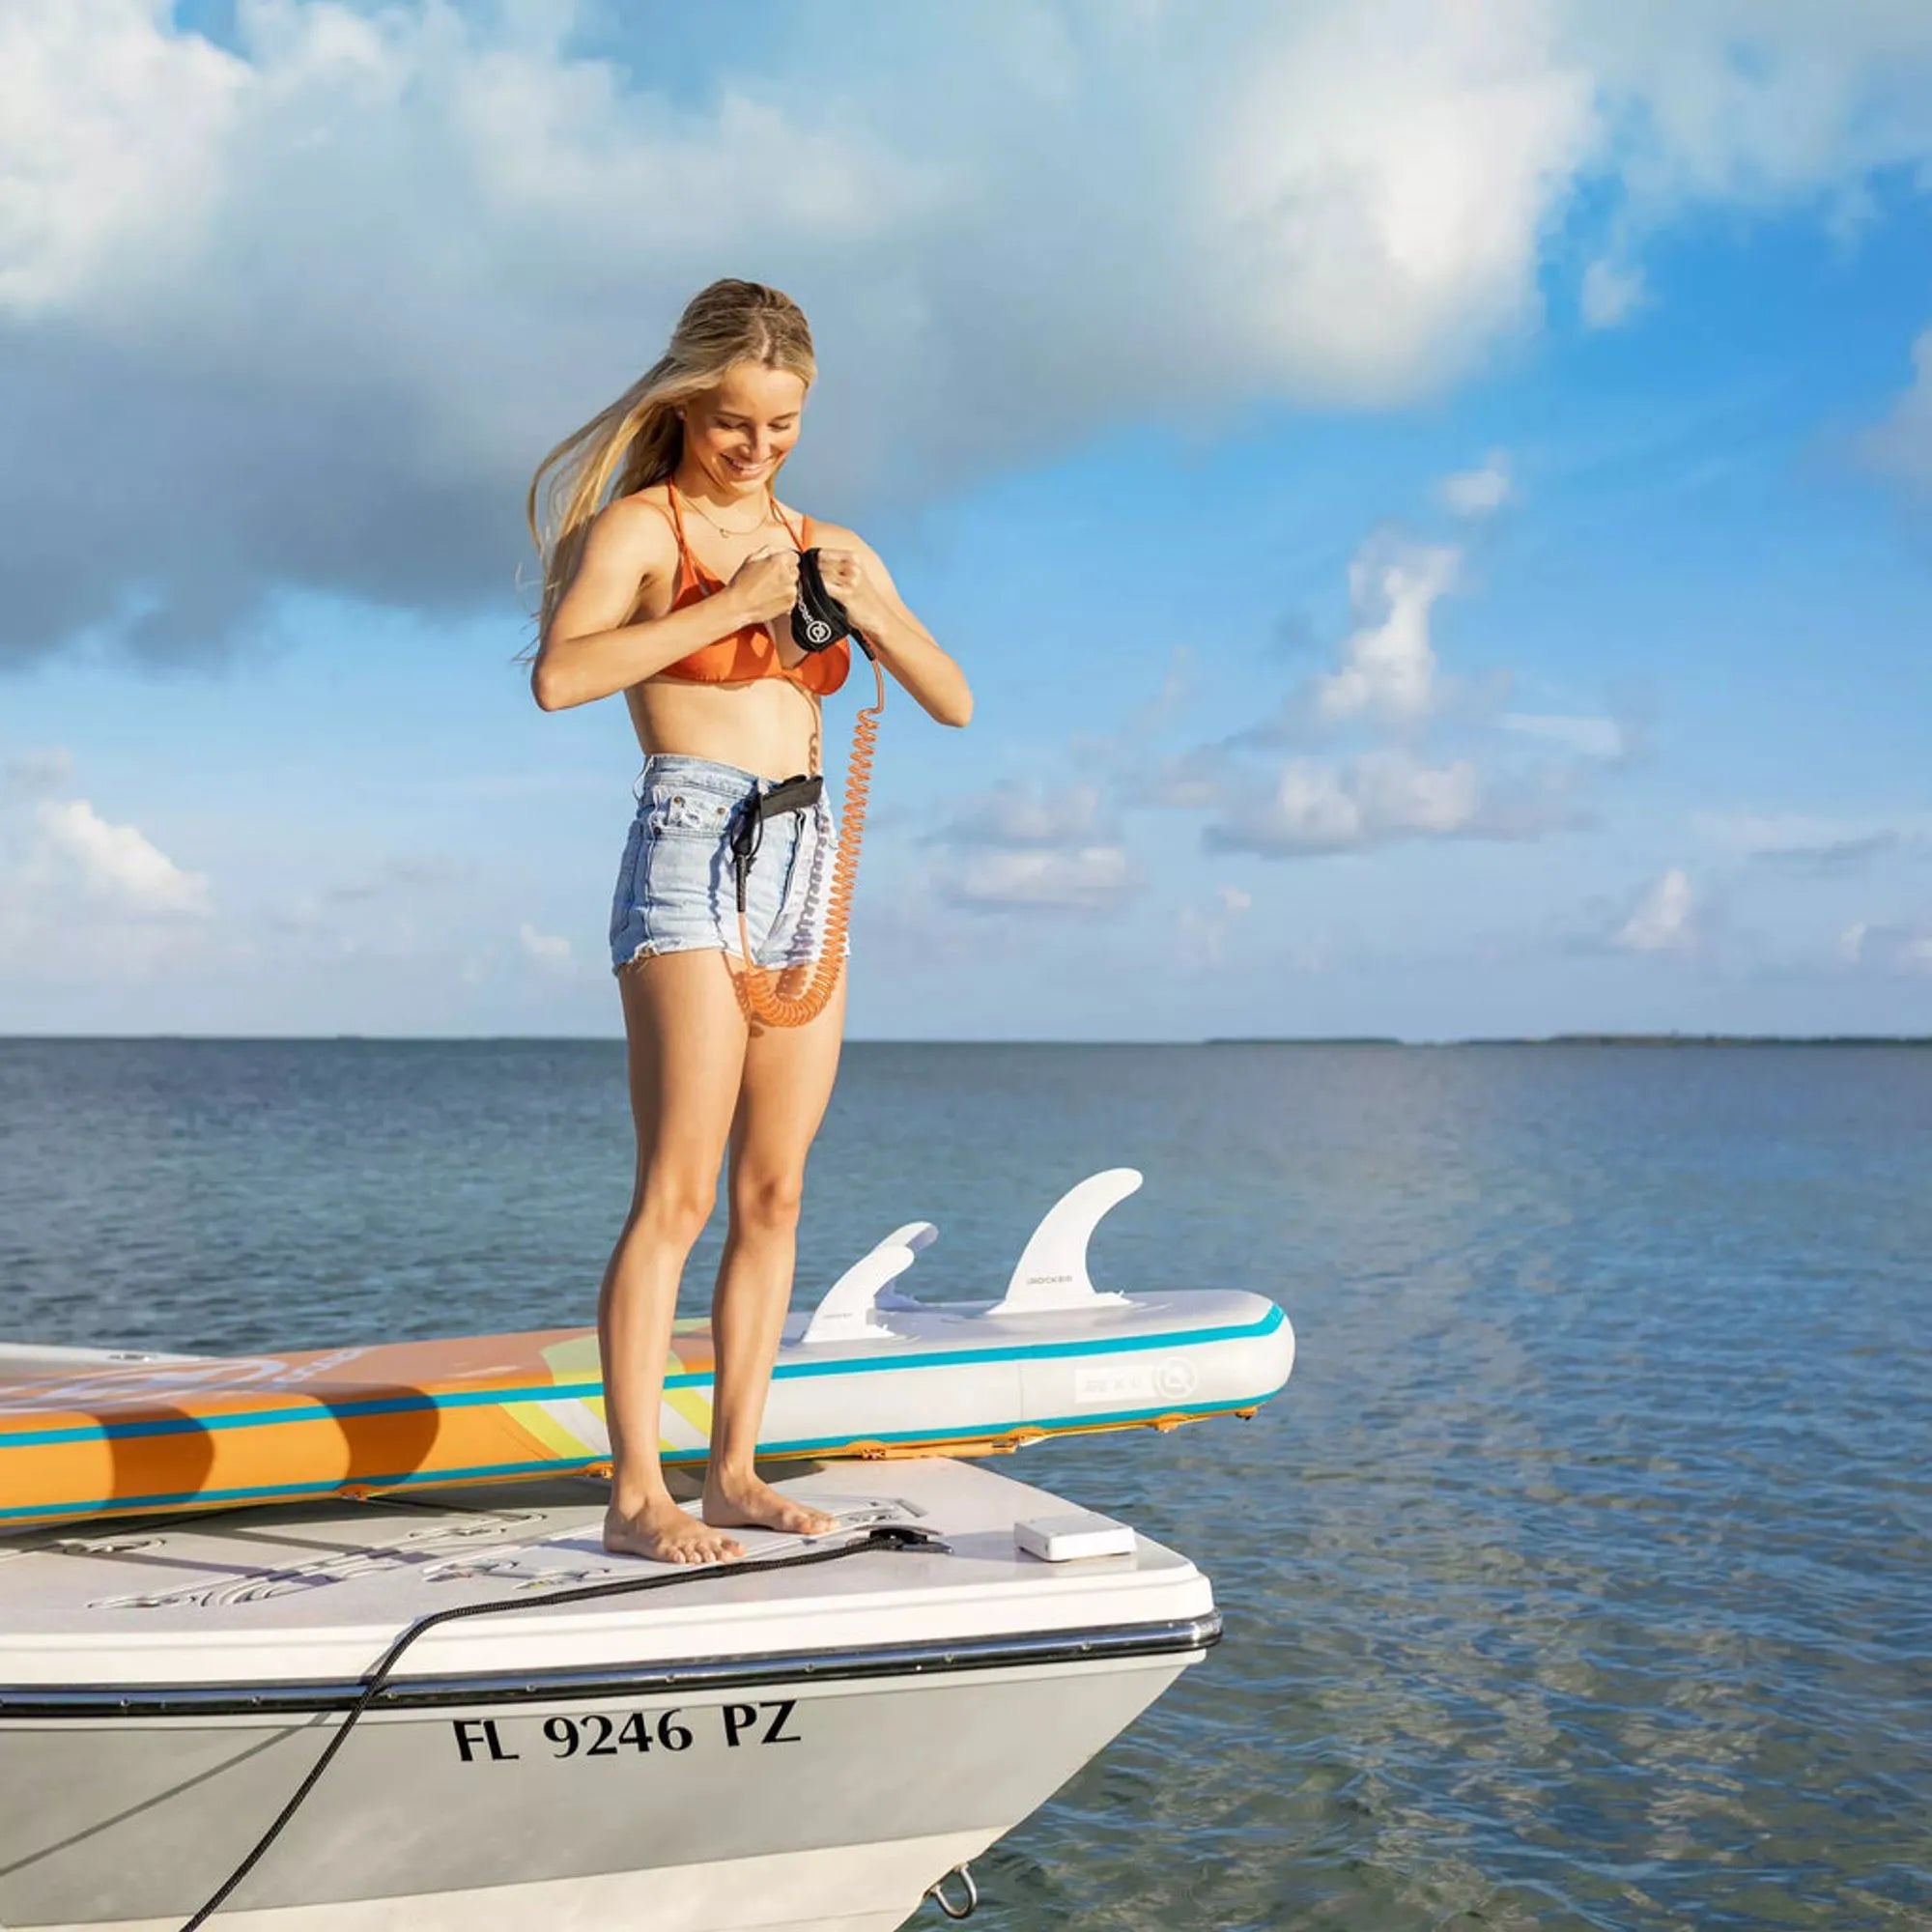 Restrictions or Regulations for Paddle Boarding in Miami